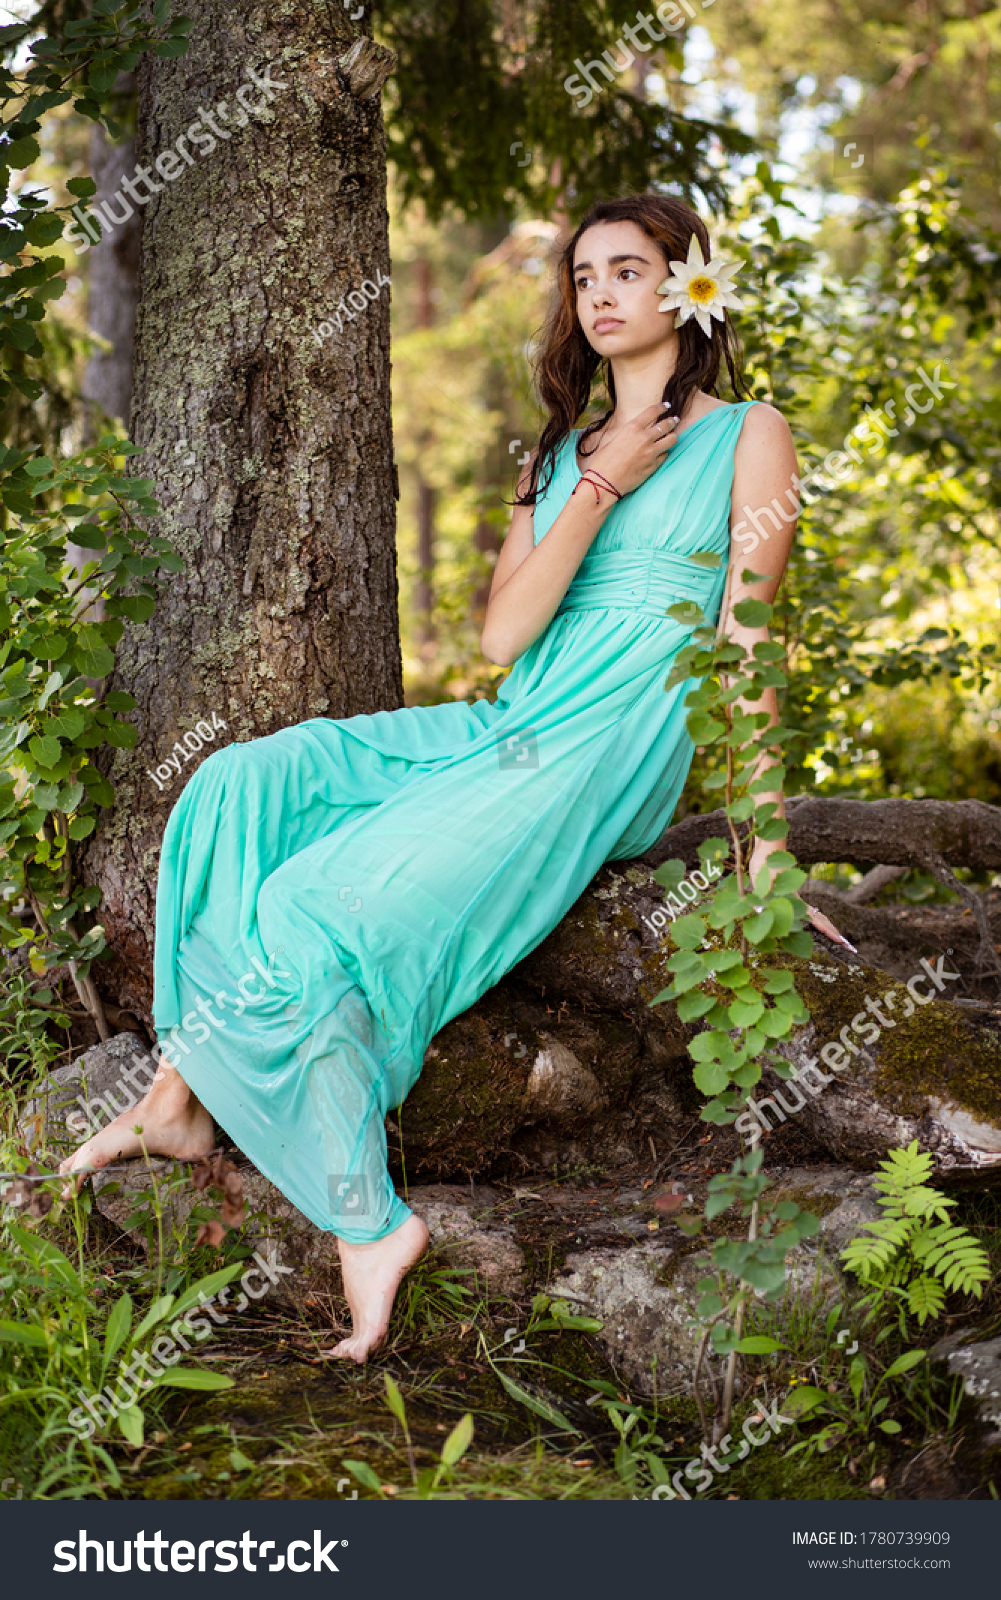 https://image.shutterstock.com/shutterstock/photos/1780739909/display_1500/stock-photo-beautiful-girl-in-a-blue-dress-with-a-water-lily-in-her-hair-against-the-backdrop-of-a-sunny-forest-1780739909.jpg